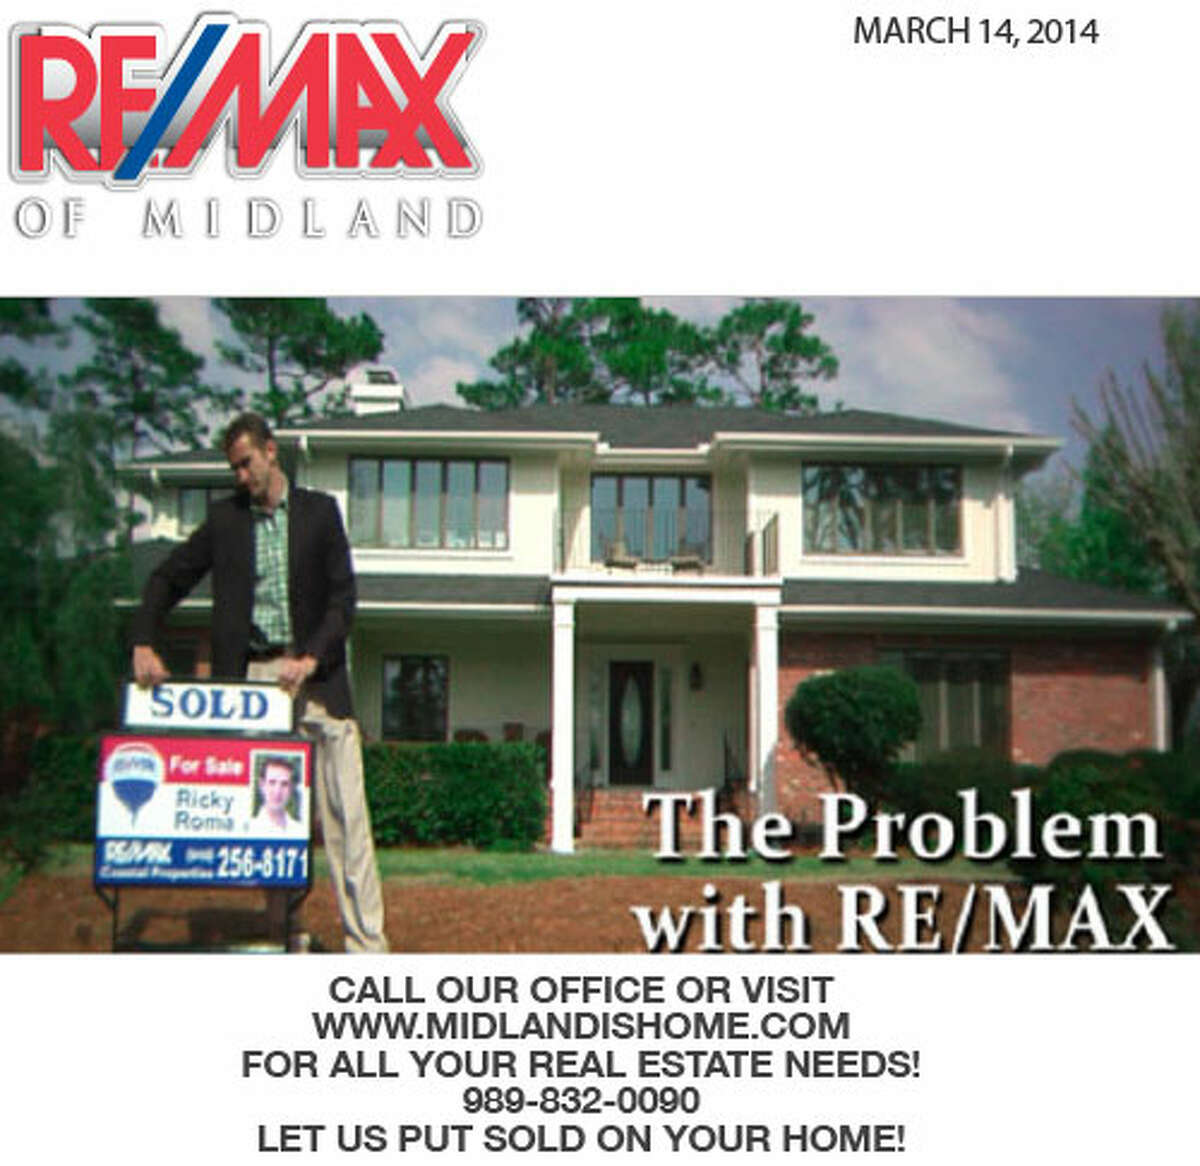 RE/MAX Of Midland - March 13th 2014